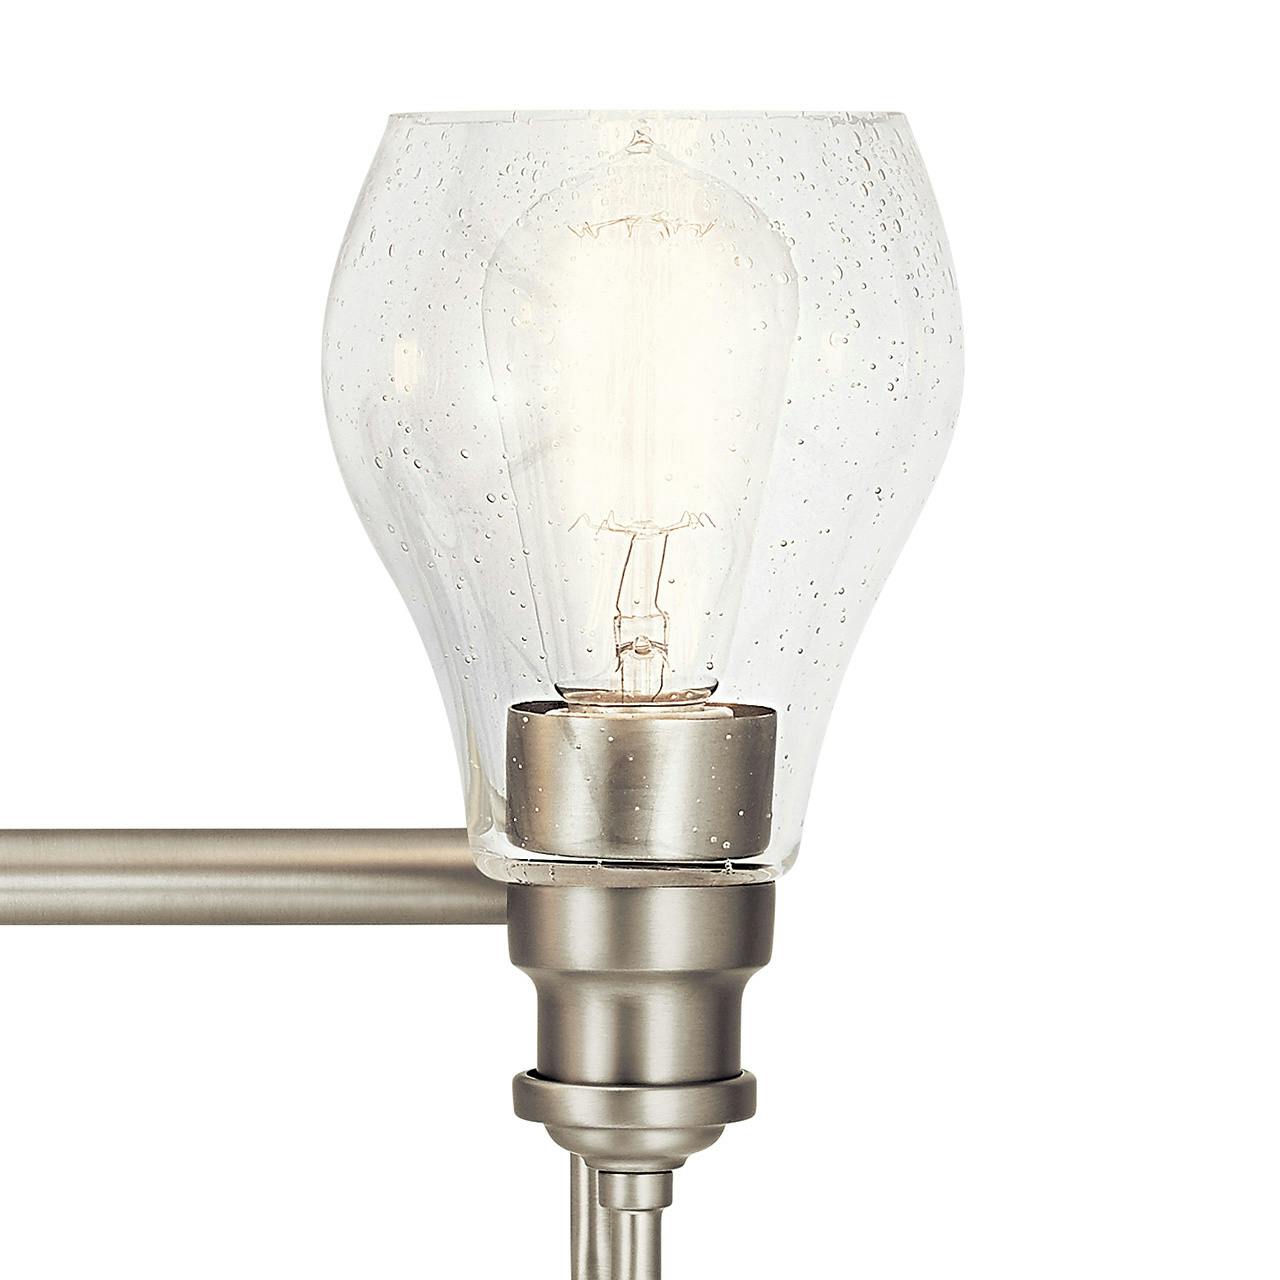 Close up view of the Greenbrier™ 3 Light Vanity Light Nickel on a white background